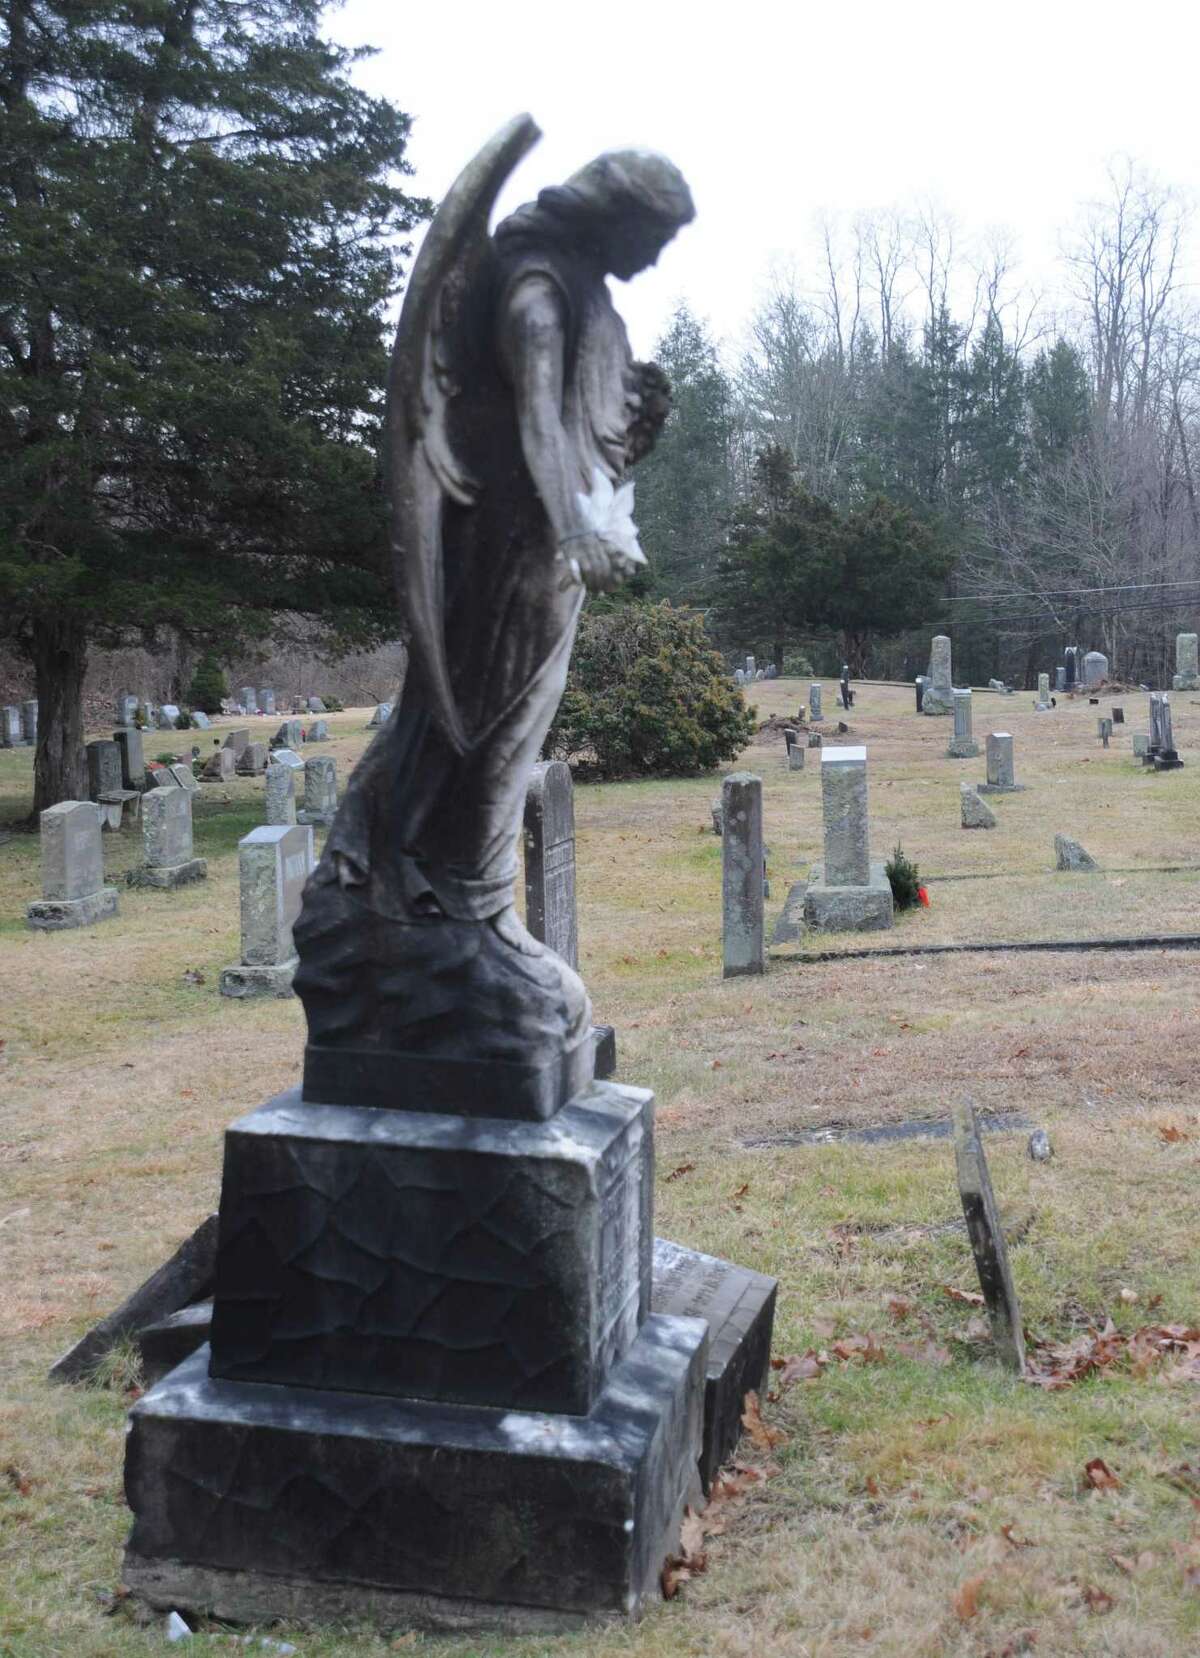 Old stones and statues mark the graves at Branchville Cemetery. The town is working to gain title to the graveyard, which dates to the mid 1800s.